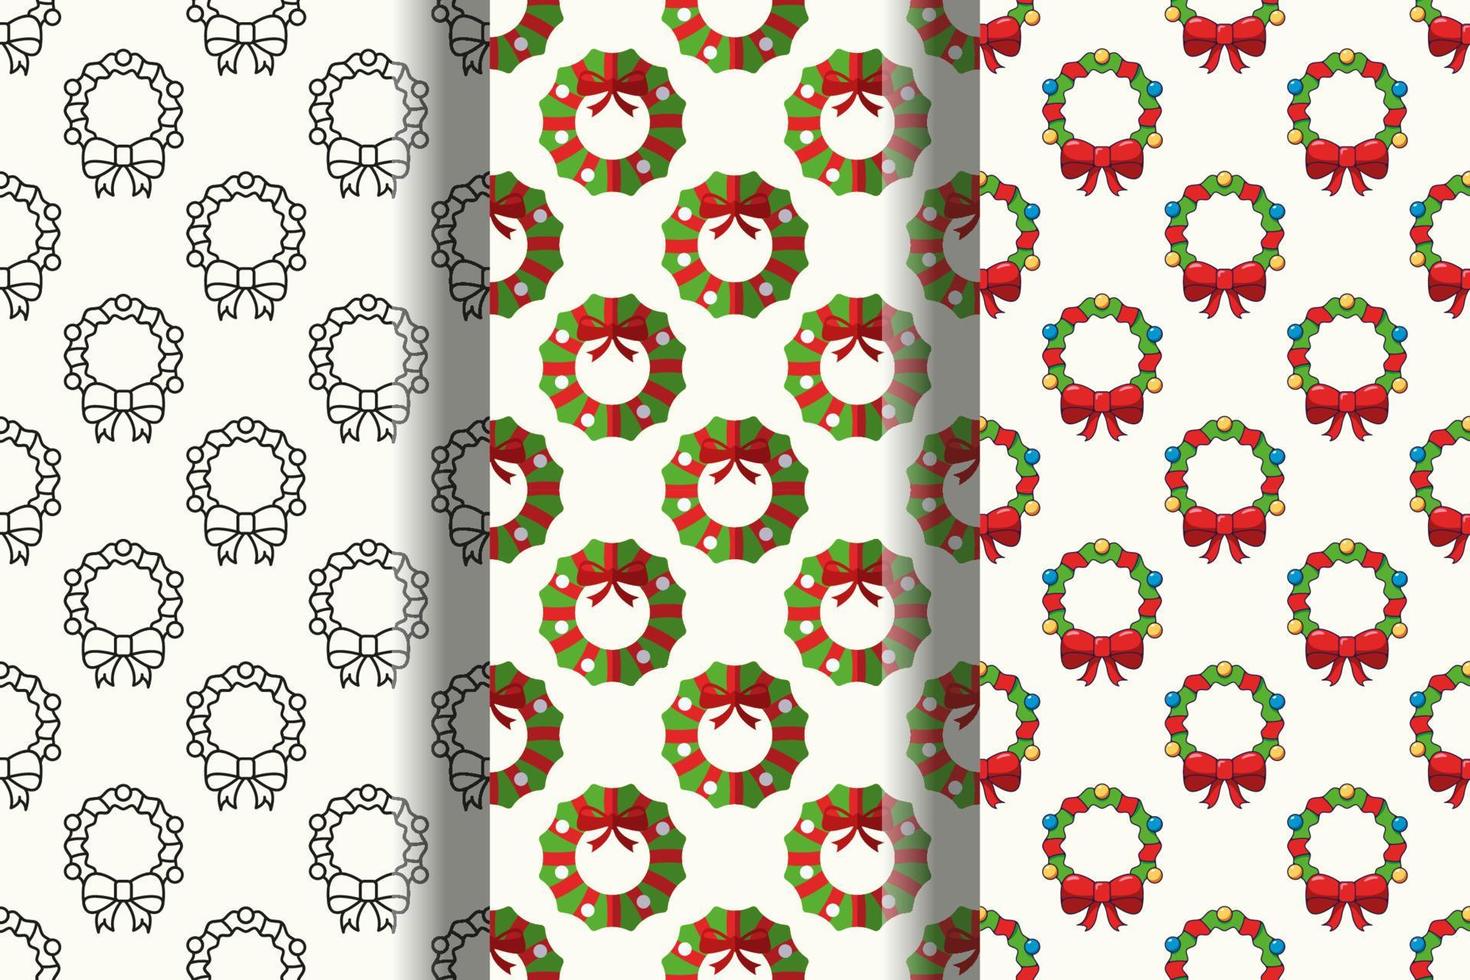 Pack of colorful seamless vector patterns of Christmas wreath